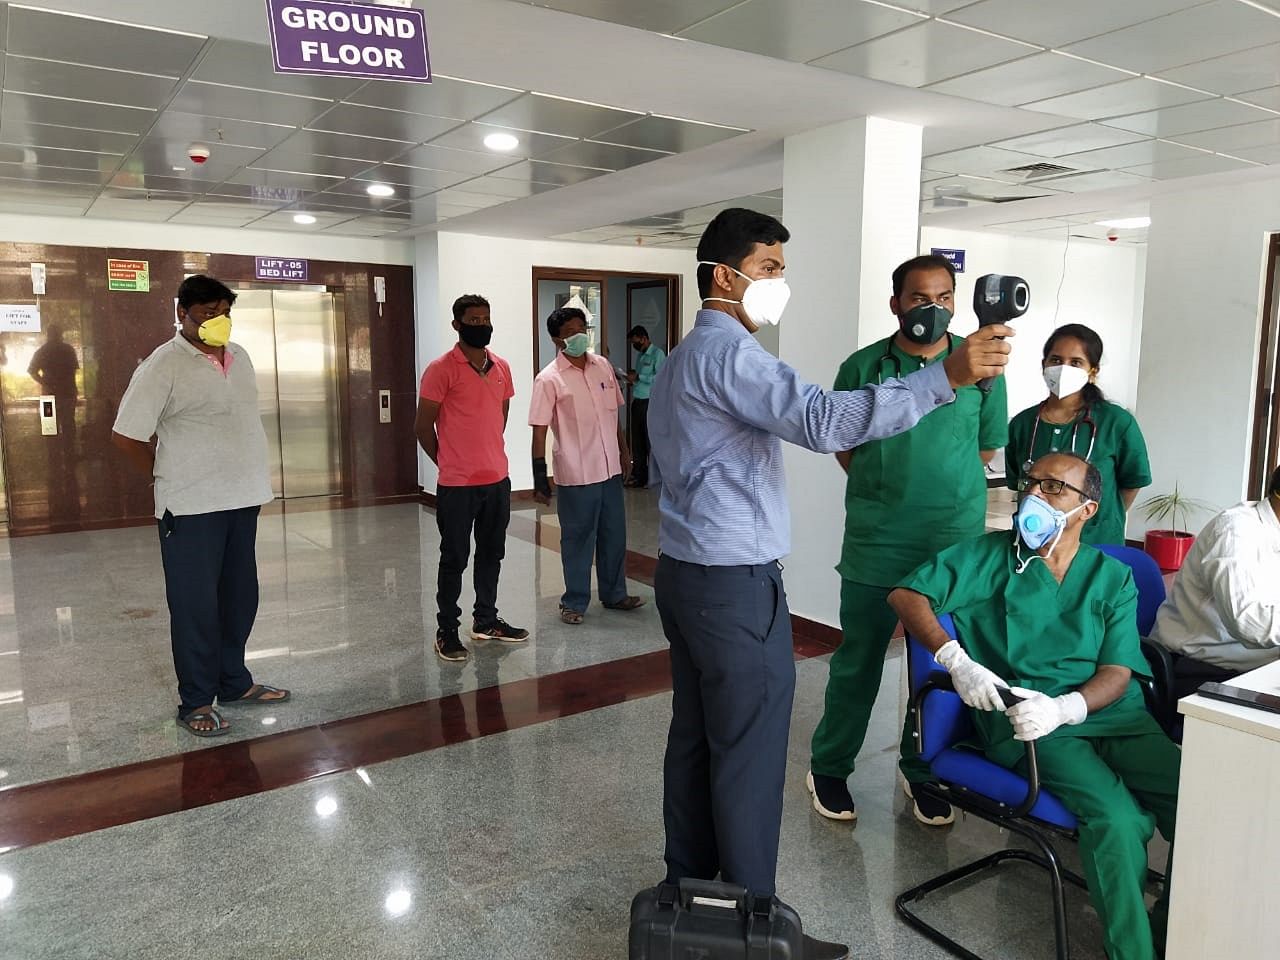 Doctors at KIMS use Infrared thermometers to monitor the temperatures of patients at the Super-Speciality hospital in the KIMS campus, where the Covid-19 patients are being treated. DH photo